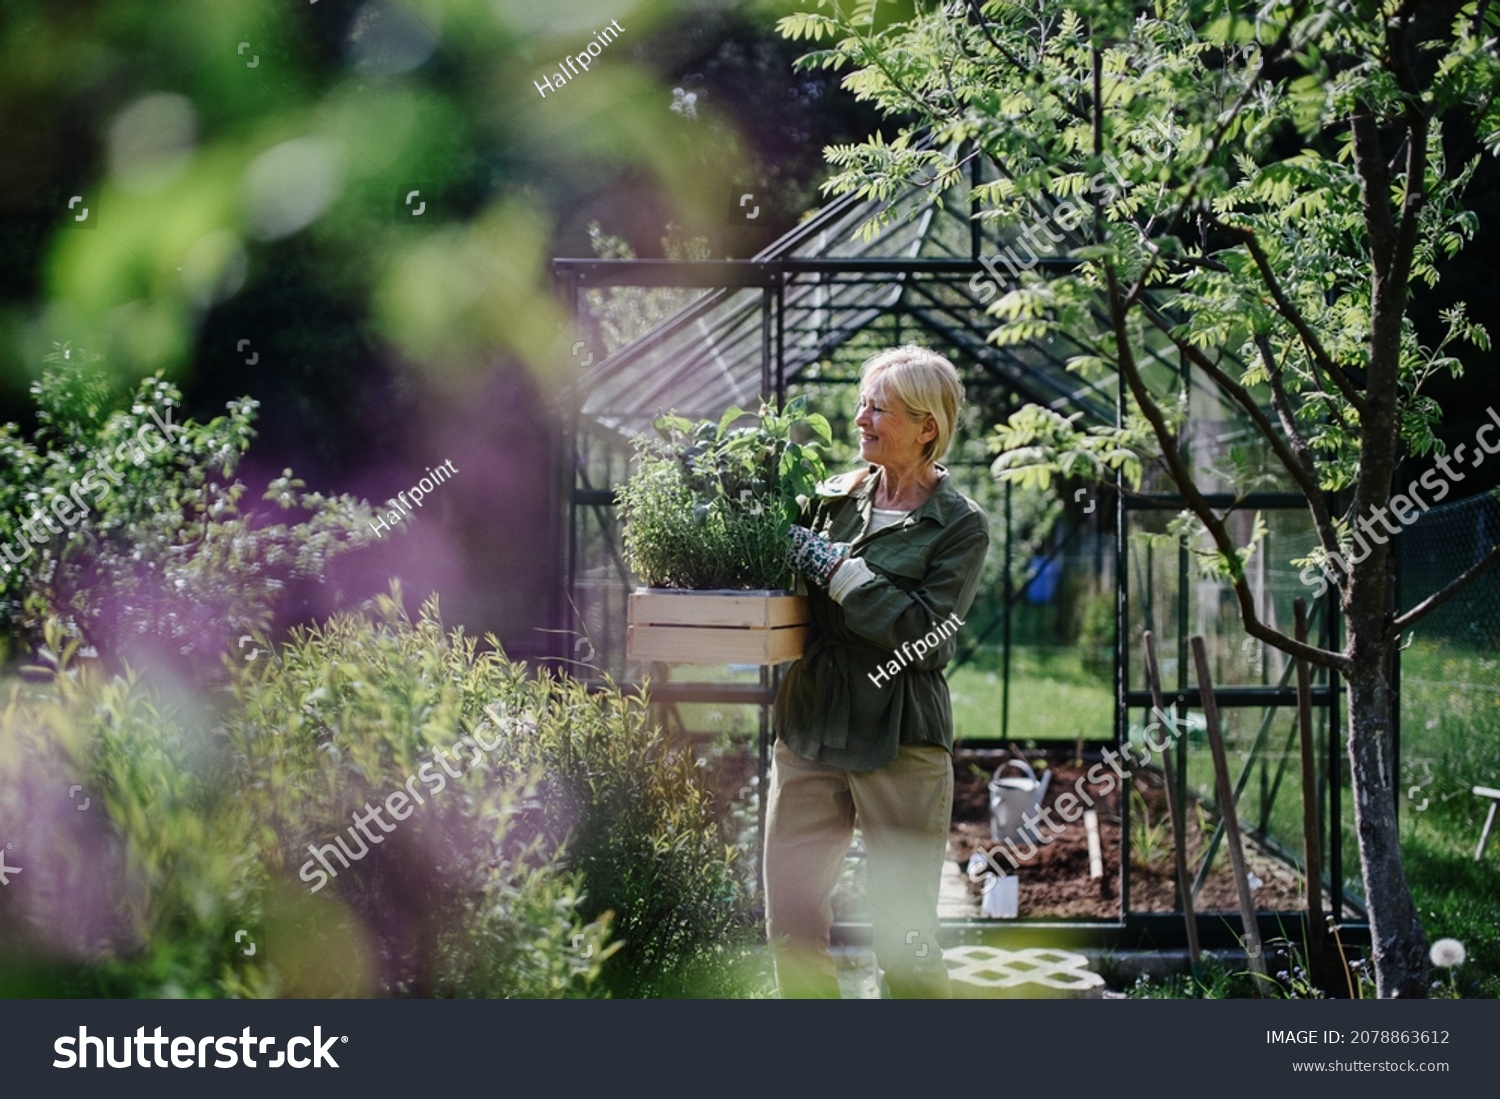 Senior gardener woman carrying crate with plants in greenhouse at garden. #2078863612